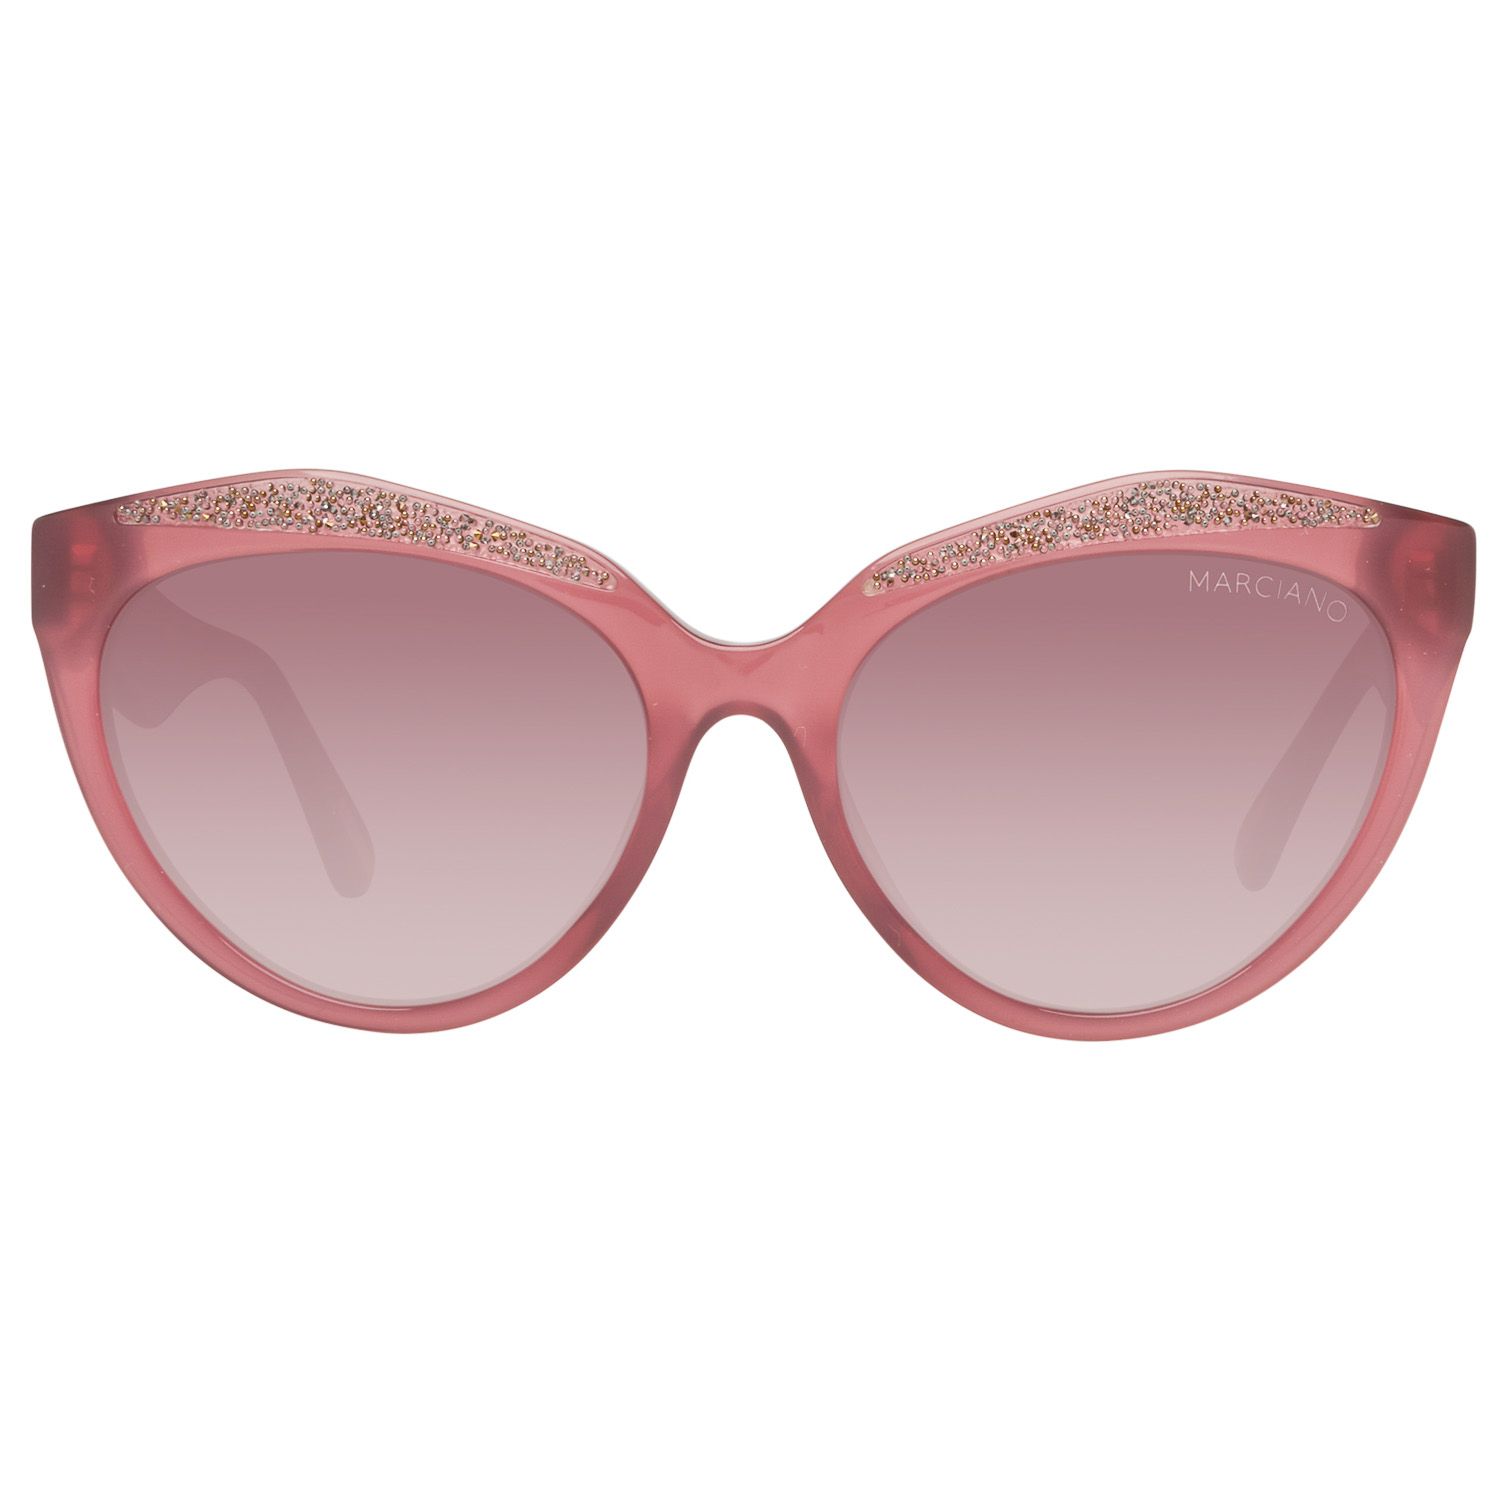 Guess by Marciano Sunglasses GM0776 75F 56
Frame color: Pink
Lenses color: Brown
Lenses material: Plastic
Filter category: 3
Style: Butterfly
Lenses effect: Gradient
Protection: 100% UVA & UVB
Lenses width: 56
Lenses height: 44
Bridge width: 18
Frame width: 142
Temples length: 140
Shipment includes: Case, cleaning cloth, documentation
Spring hinge: No